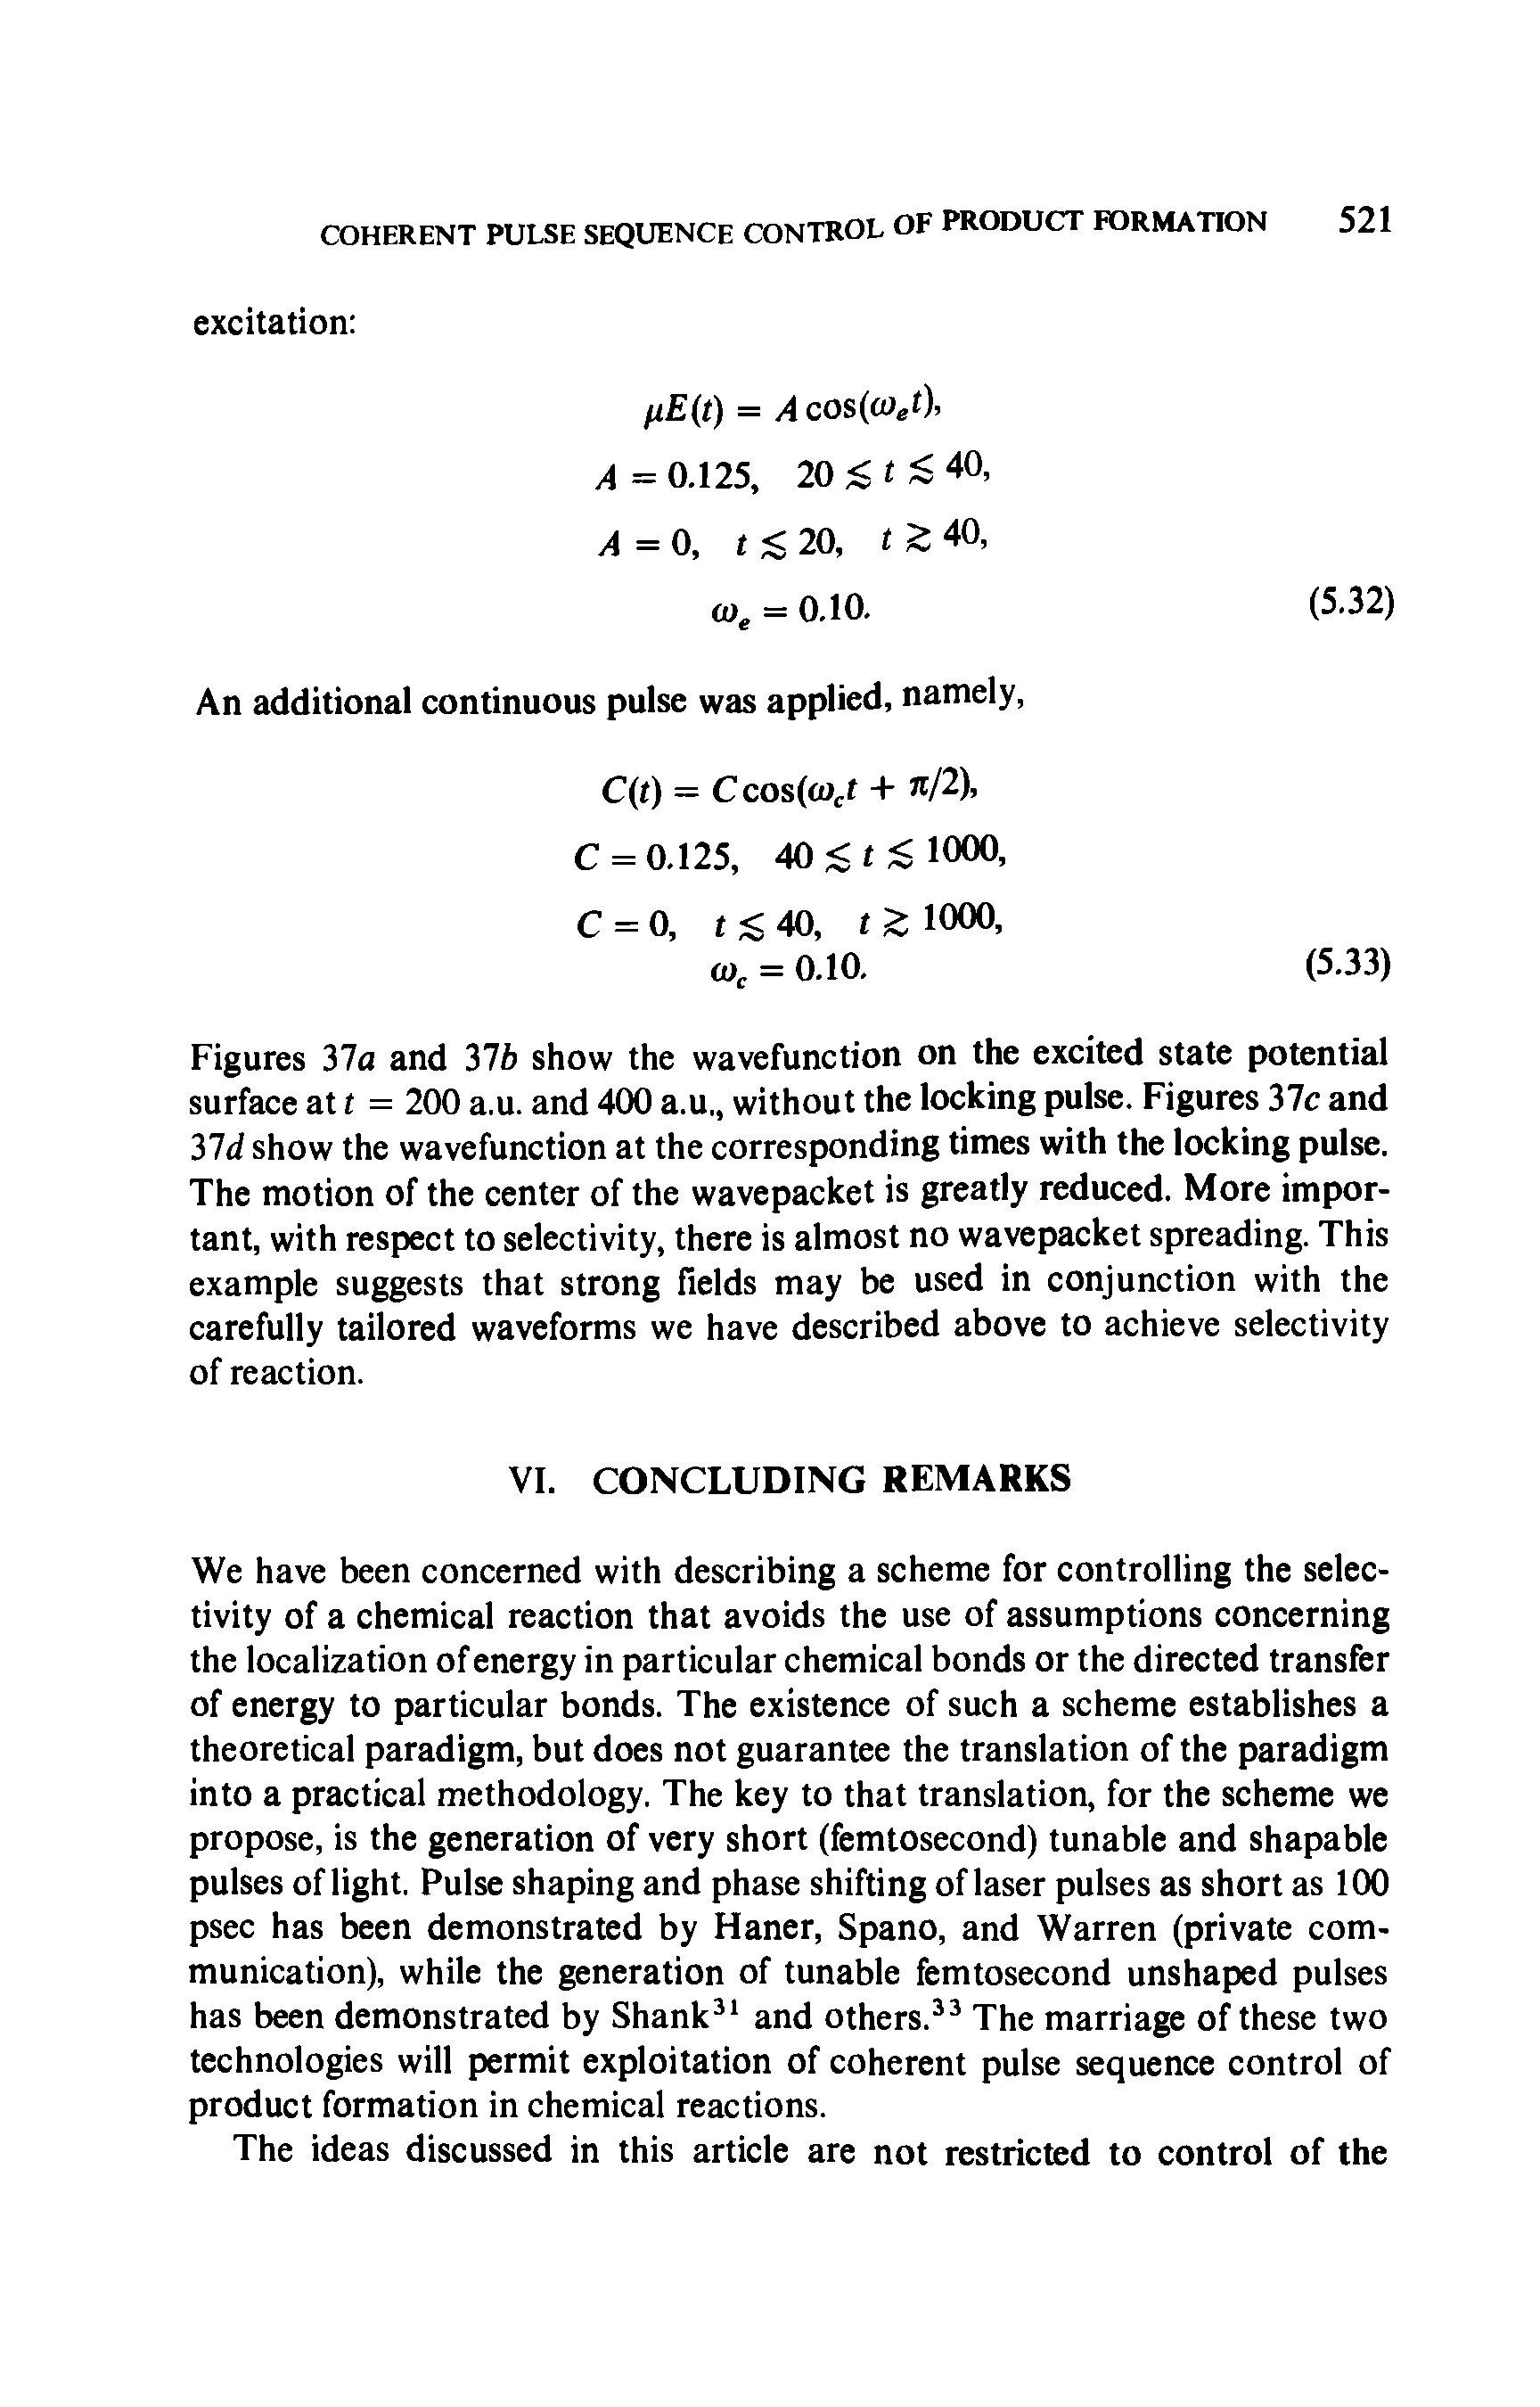 Figures 37a and 37b show the wavefunction on the excited state potential surface at t = 200 a.u. and 400 a.u without the locking pulse. Figures 37c and lid show the wavefunction at the corresponding times with the locking pulse. The motion of the center of the wavepacket is greatly reduced. More important, with respect to selectivity, there is almost no wavepacket spreading. This example suggests that strong fields may be used in conjunction with the carefully tailored waveforms we have described above to achieve selectivity of reaction.